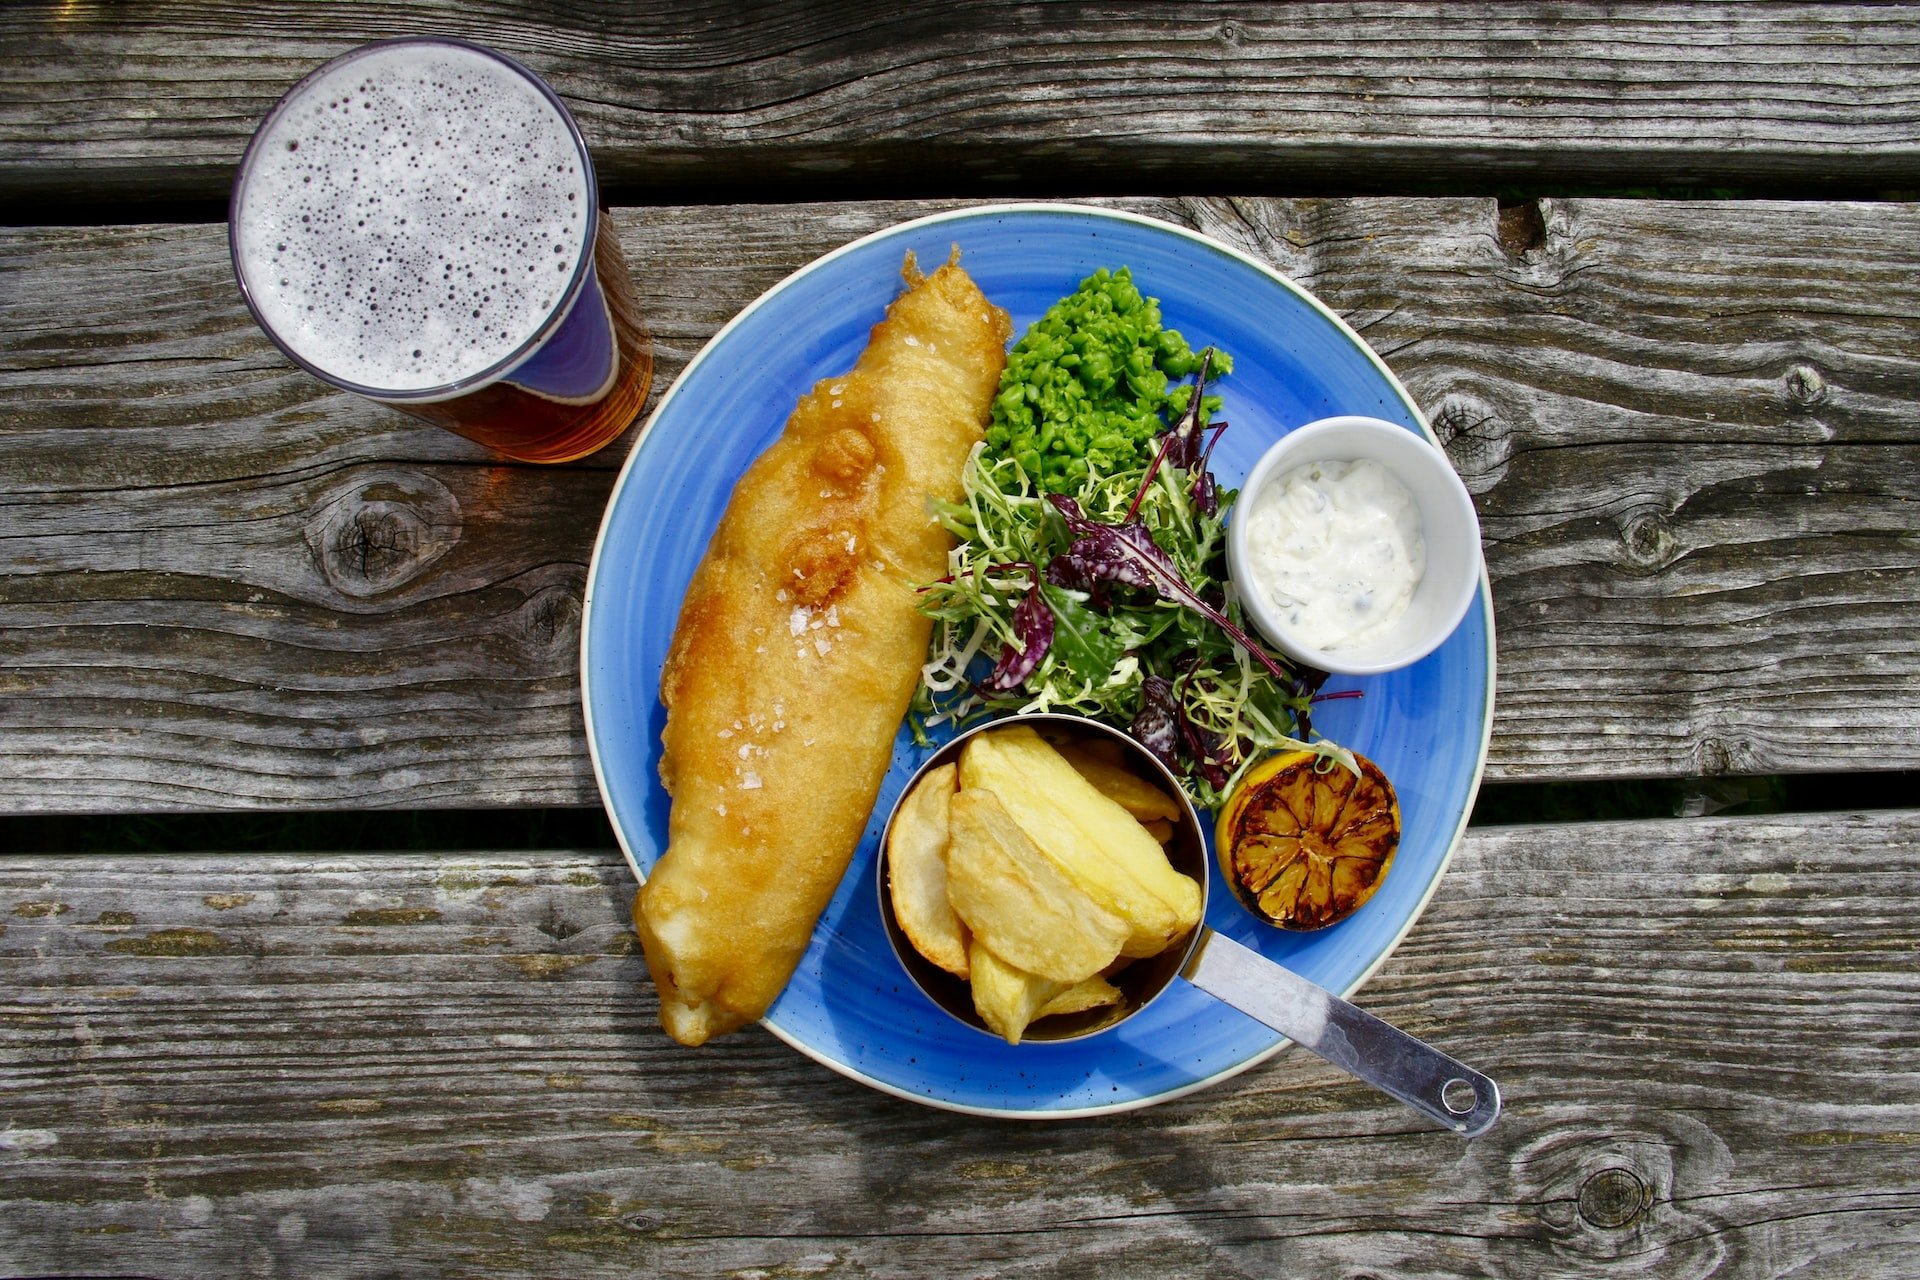 Fish and chips is one of the most common English food dishes in the UK (photo: Nick Fewings)